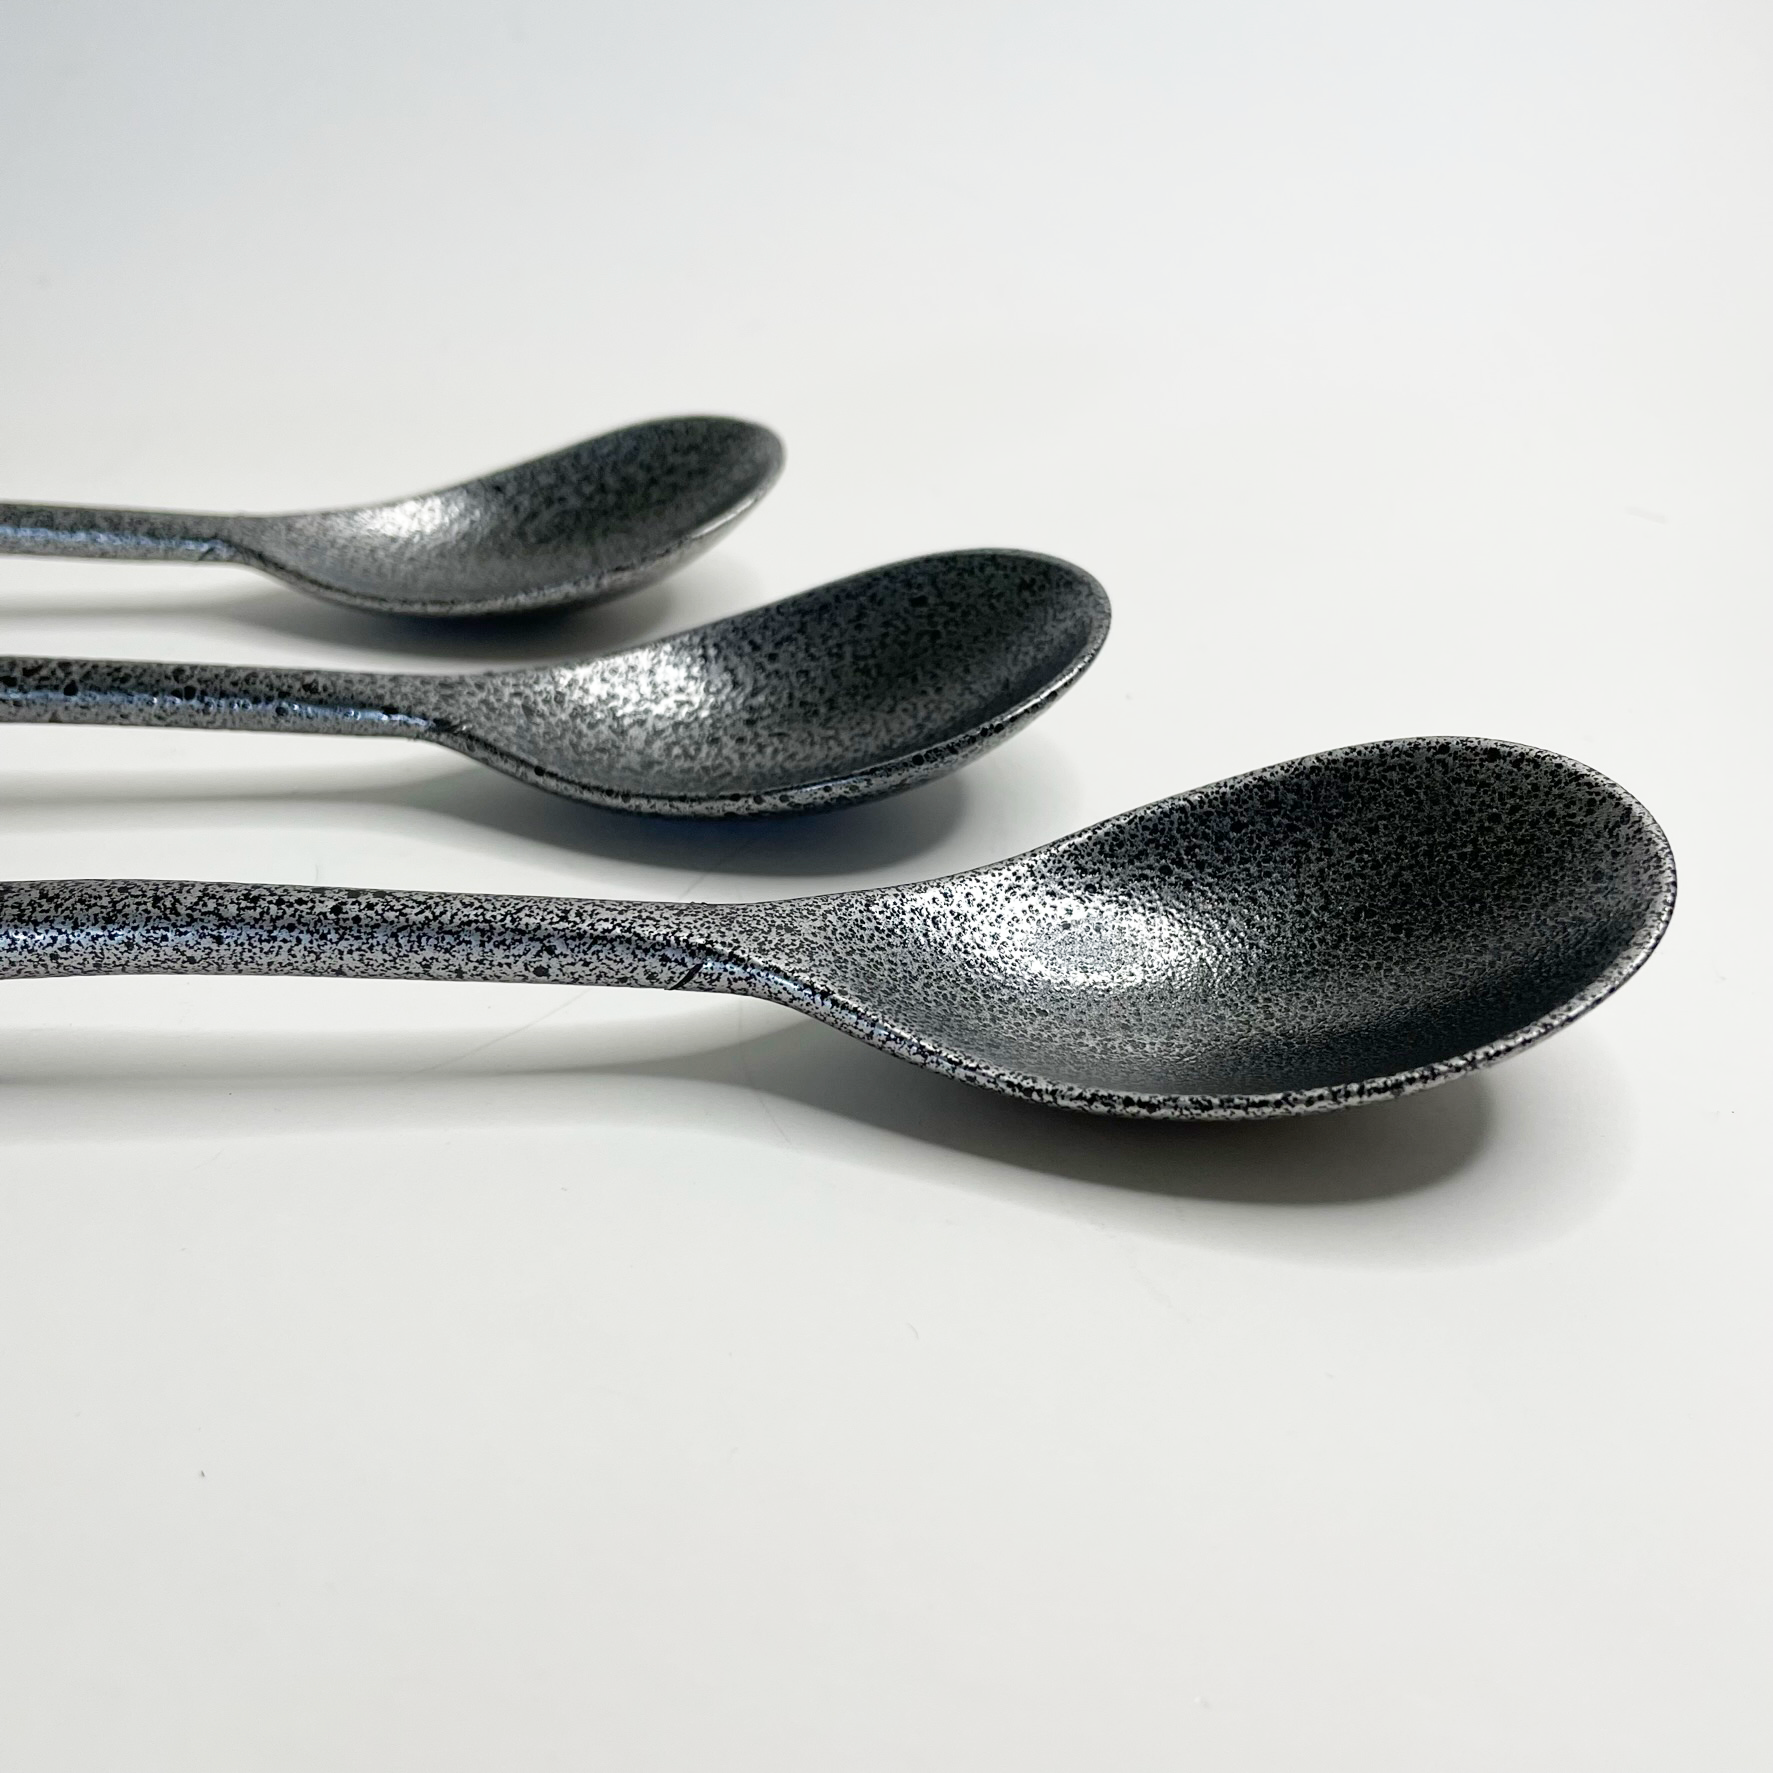 Spherification Spoon Deco Spoon Quenelle Spoon (tbsp size) Quenelle Spoon  (tsp size) For more detail about this product, don't hestitate…